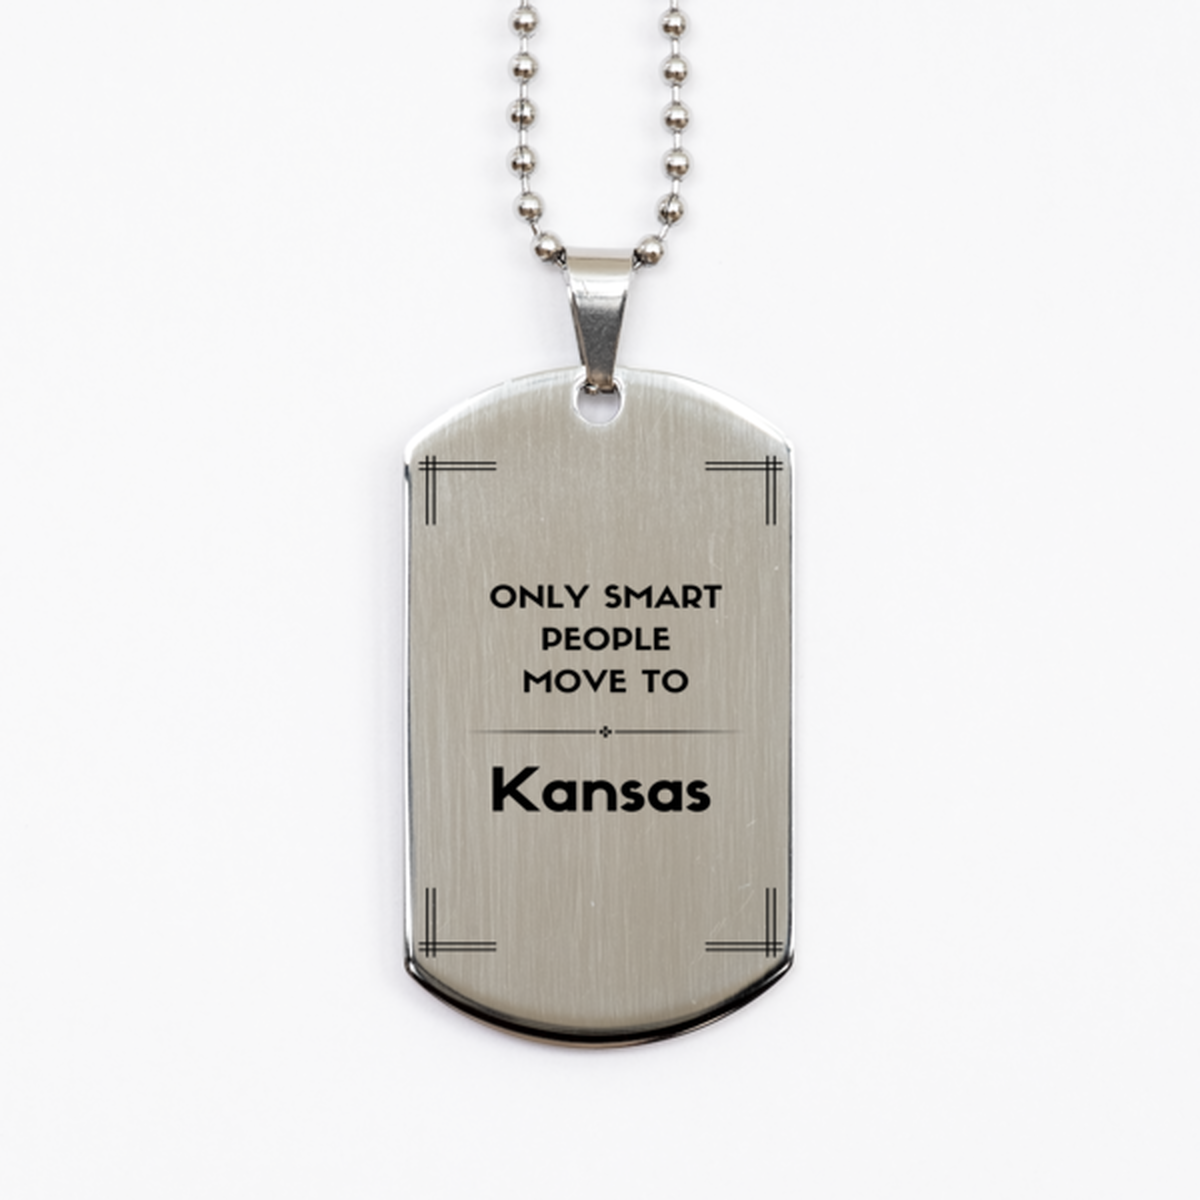 Only smart people move to Kansas Silver Dog Tag, Gag Gifts For Kansas, Move to Kansas Gifts for Friends Coworker Funny Saying Quote